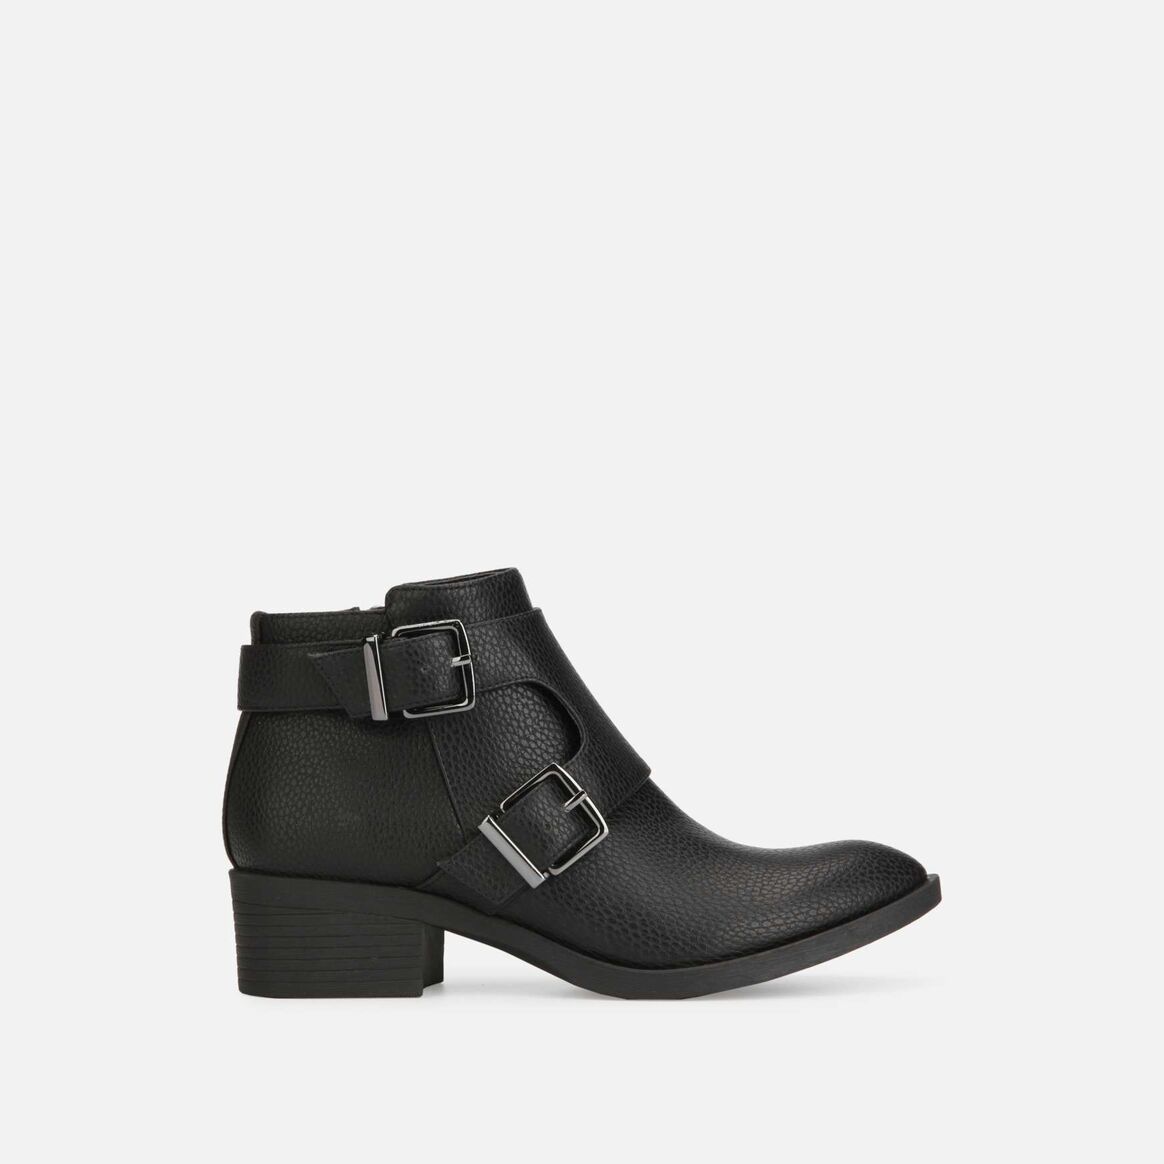 Kenneth Cole Shoes: Men's Vinny Driver Suede Loafer $12, Women's Re-Buckle Boot